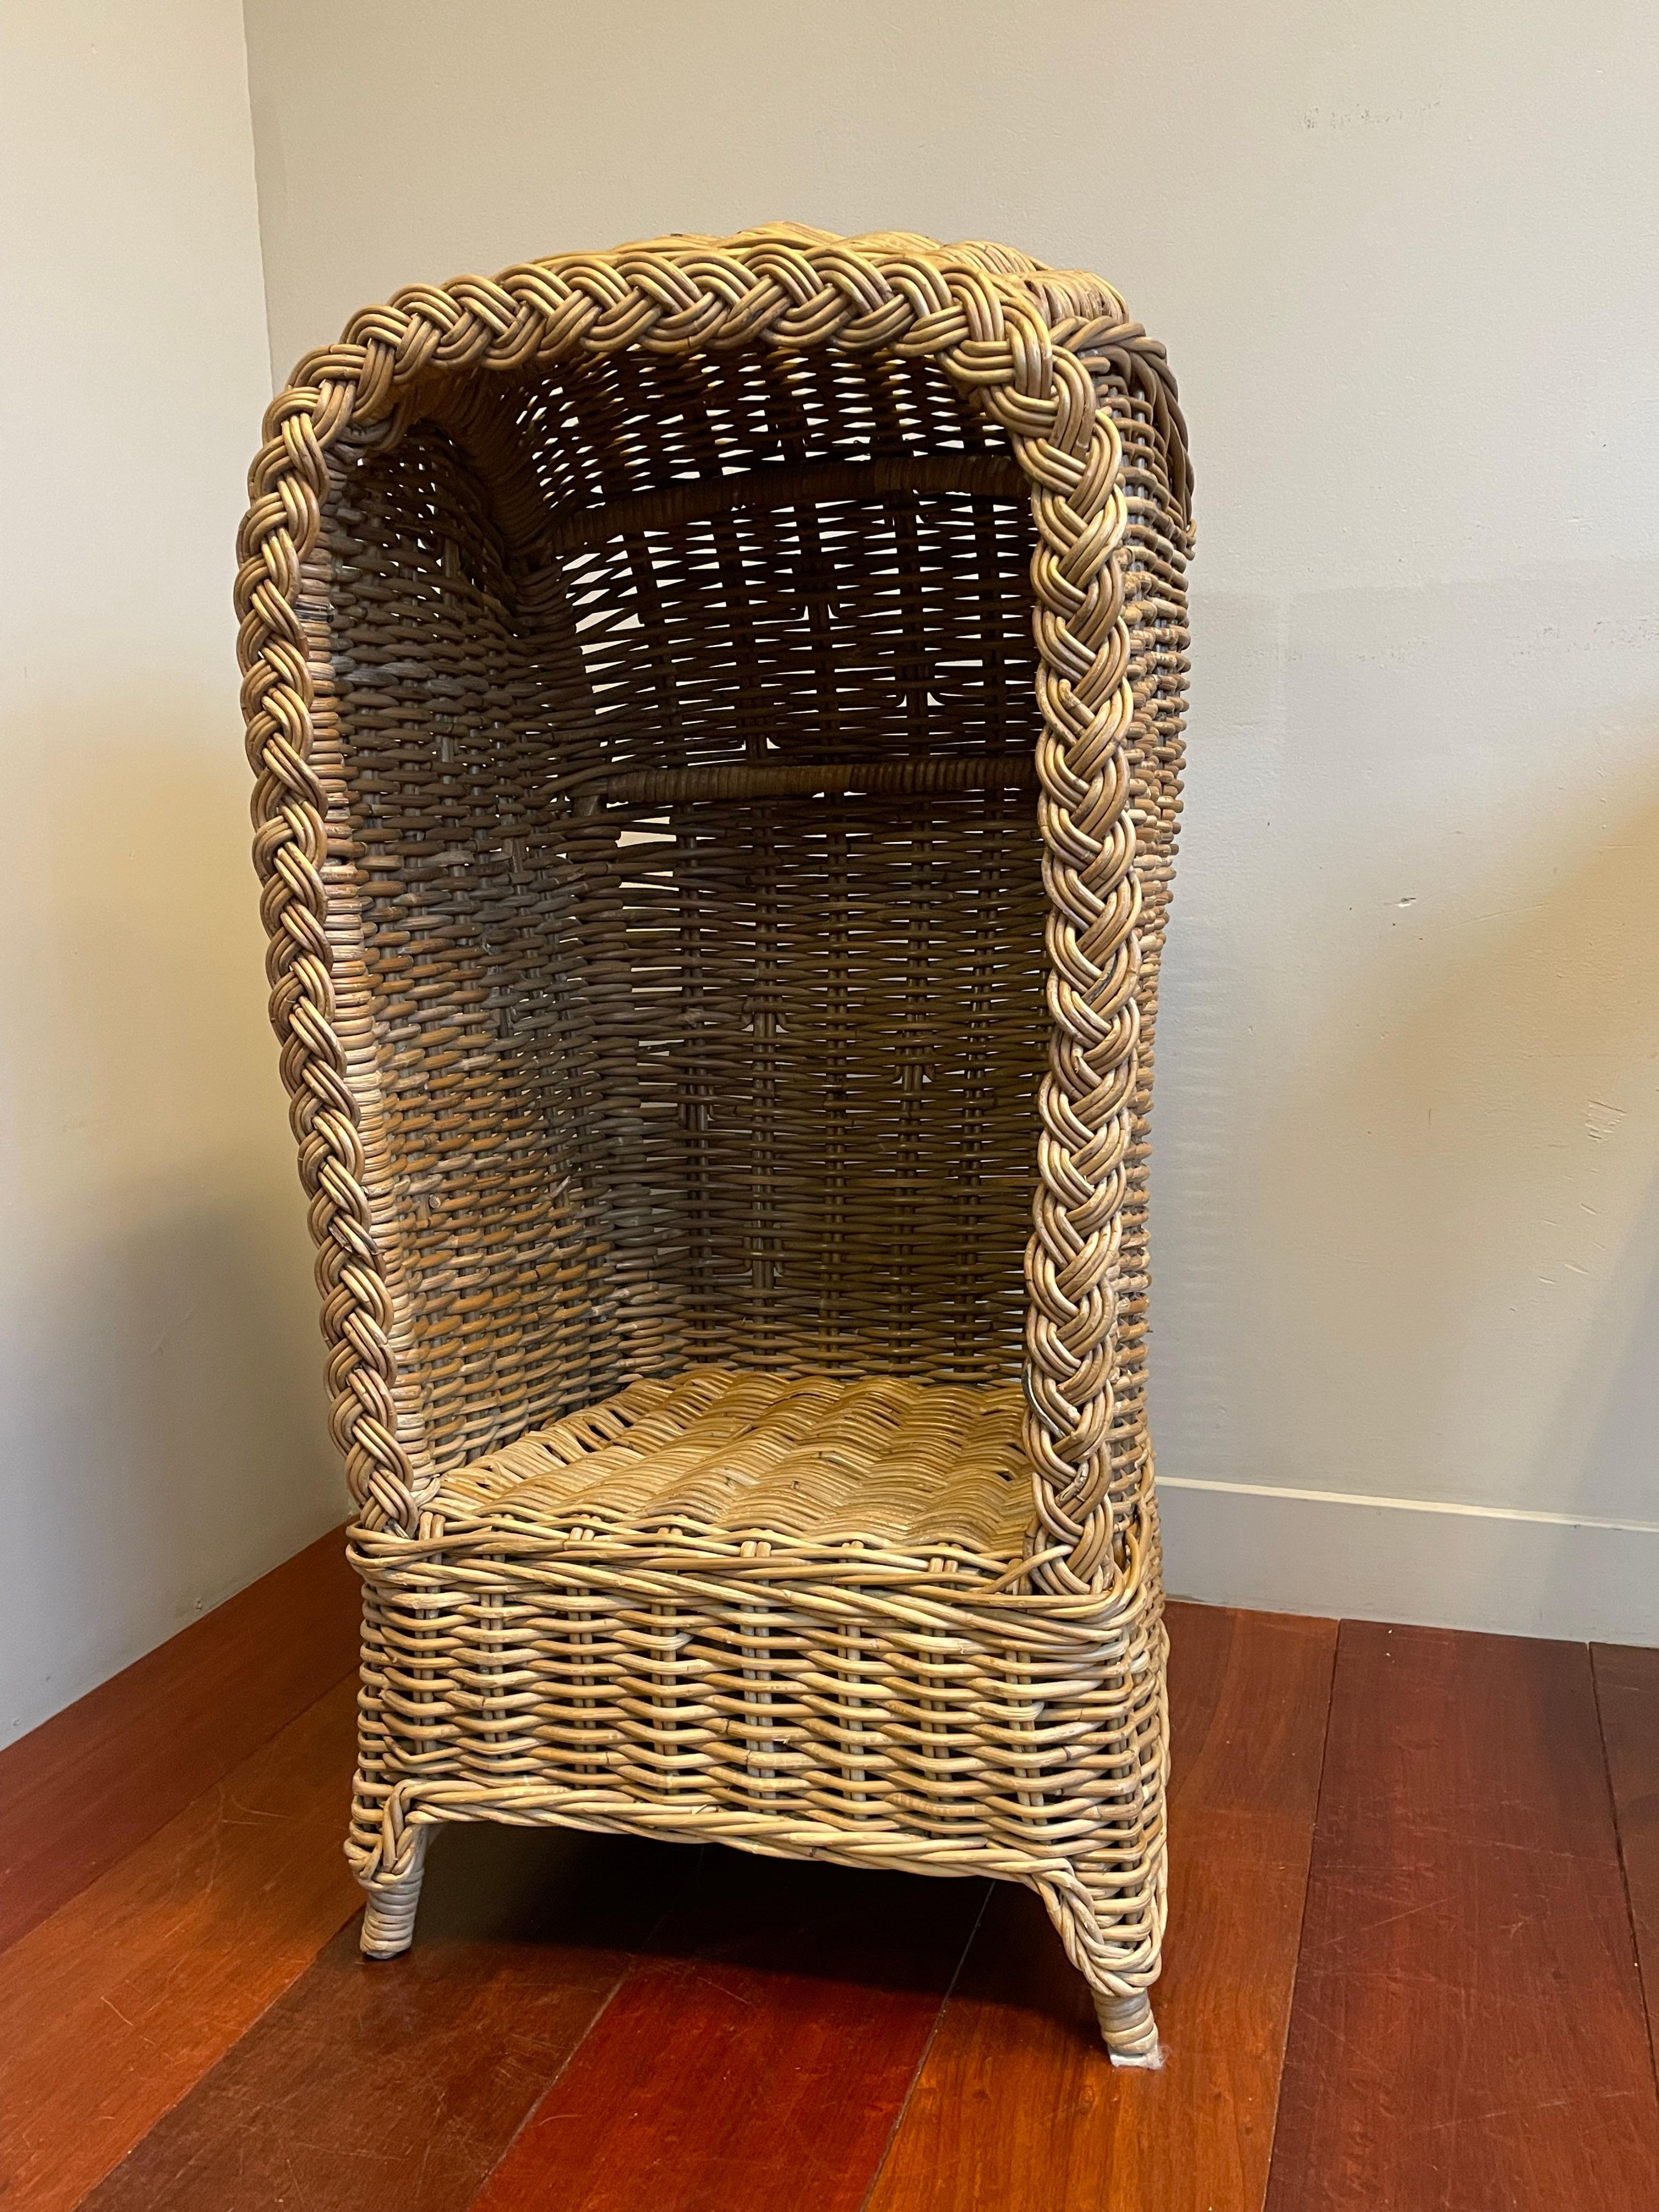 Very Rare & Super Decorative Antique-Like Hand Woven Rattan Beach Chair for Kids For Sale 4